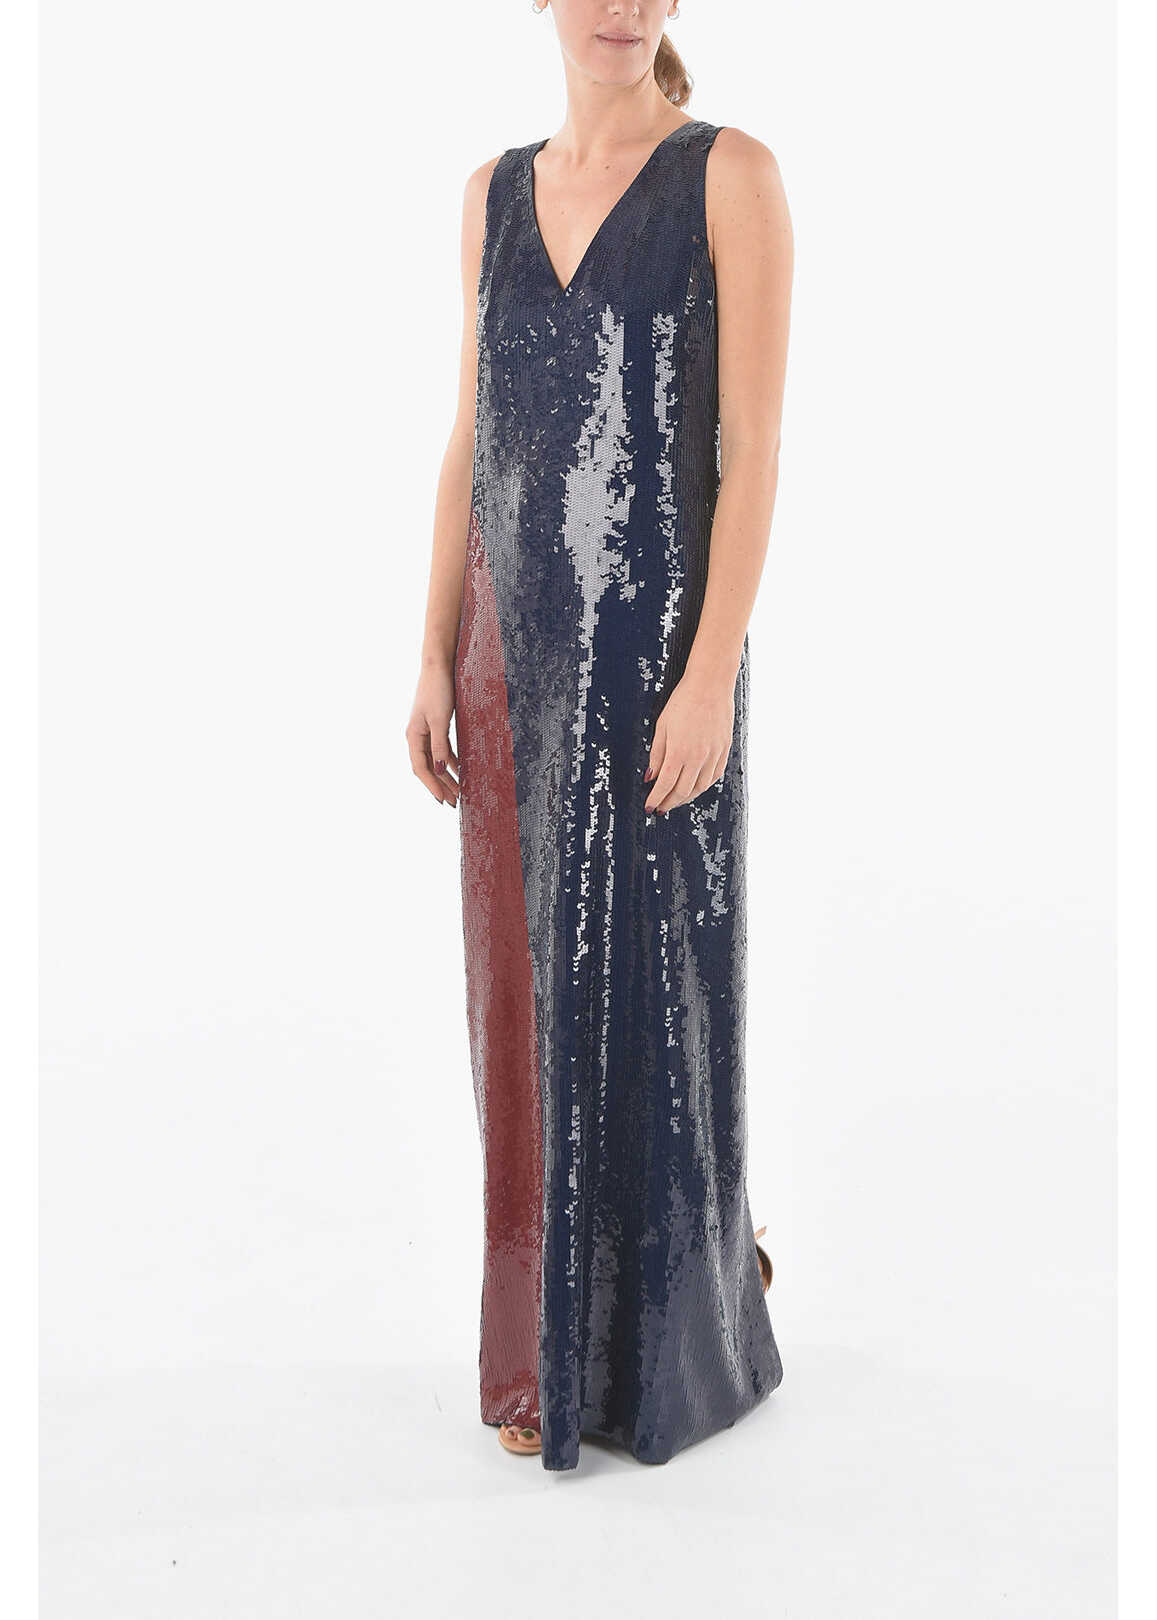 Tory Burch Sequined Sleeve-Less Long Dress With Back Slit Blue